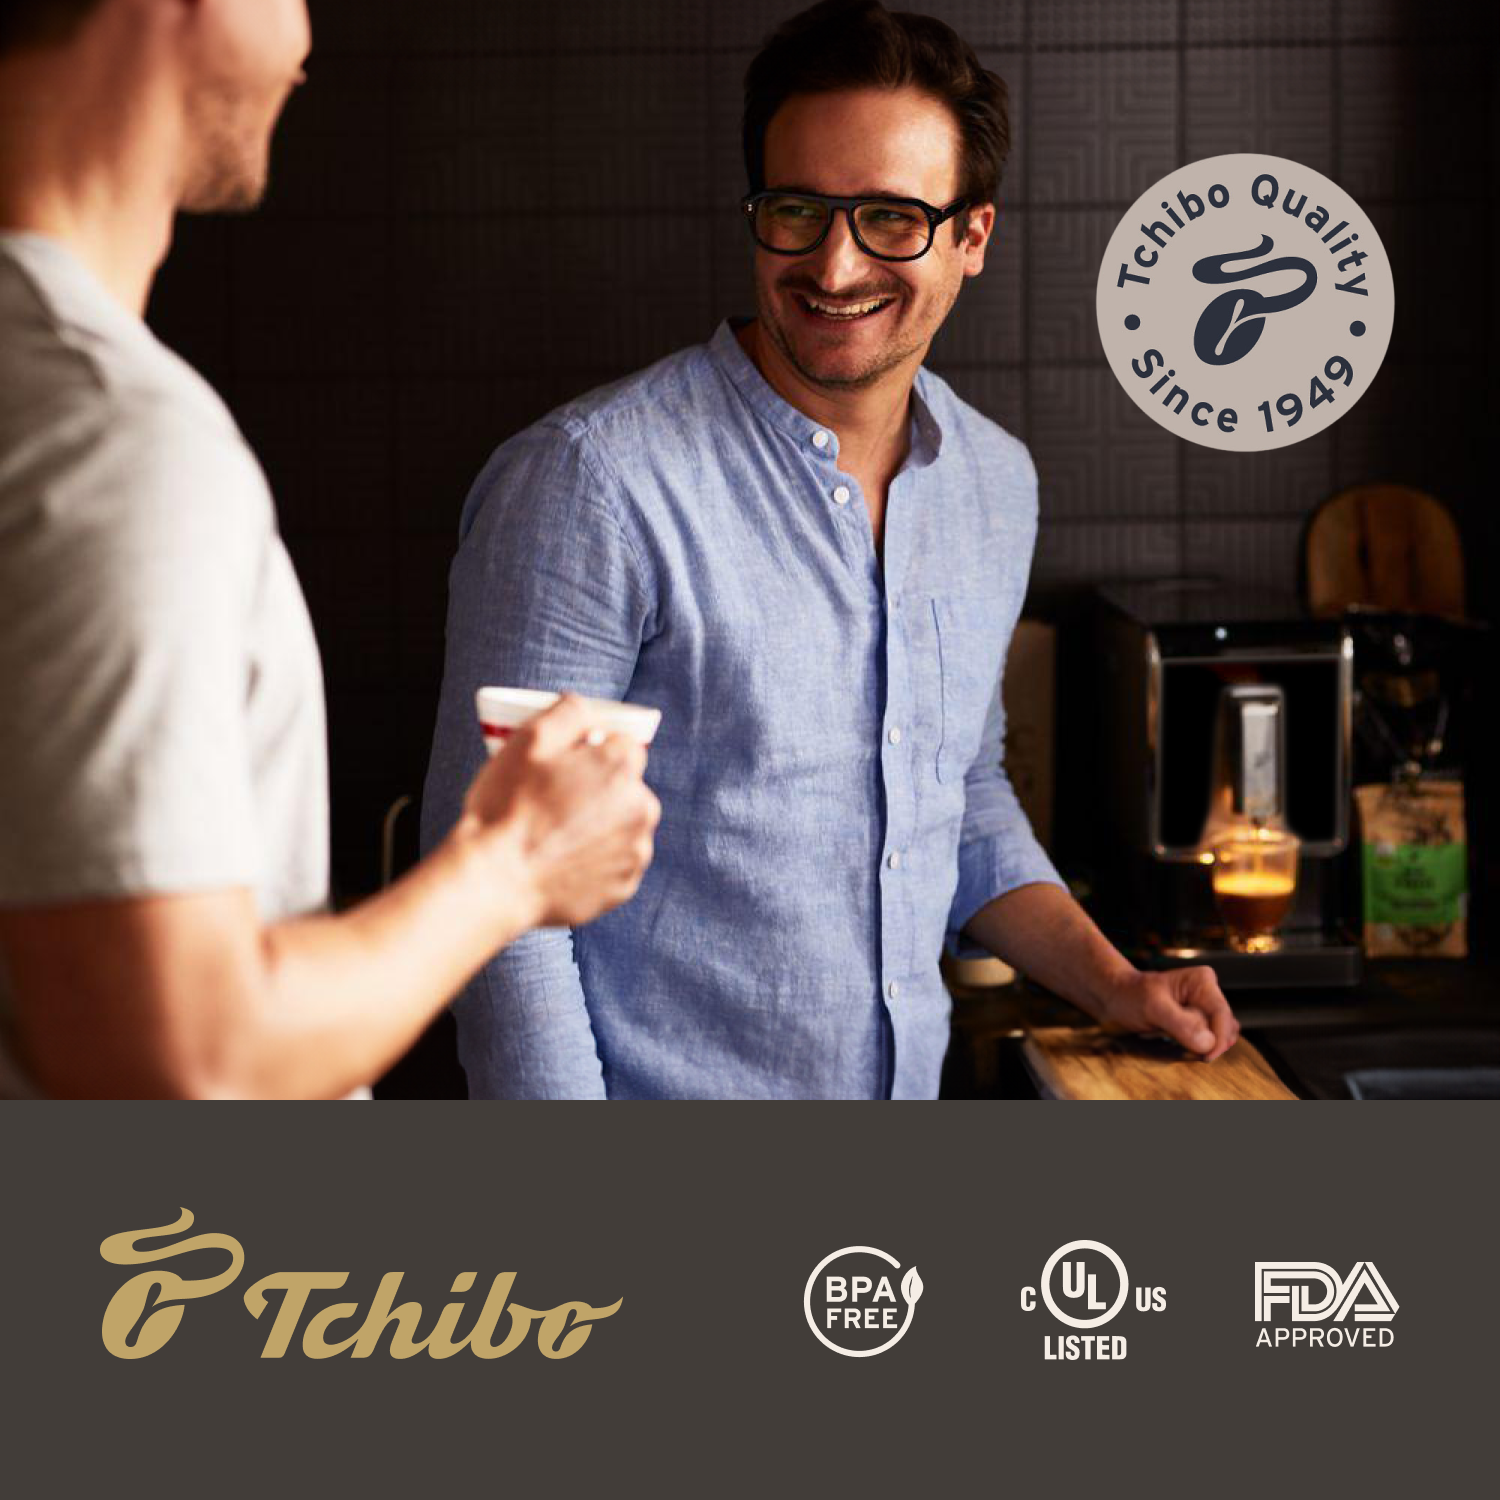 Tchibo Single Serve Coffee Maker - Automatic Espresso Coffee Machine -  Built-in Grinder, No Coffee Pods Needed - Comes with x2 17.6 Ounce Bags of